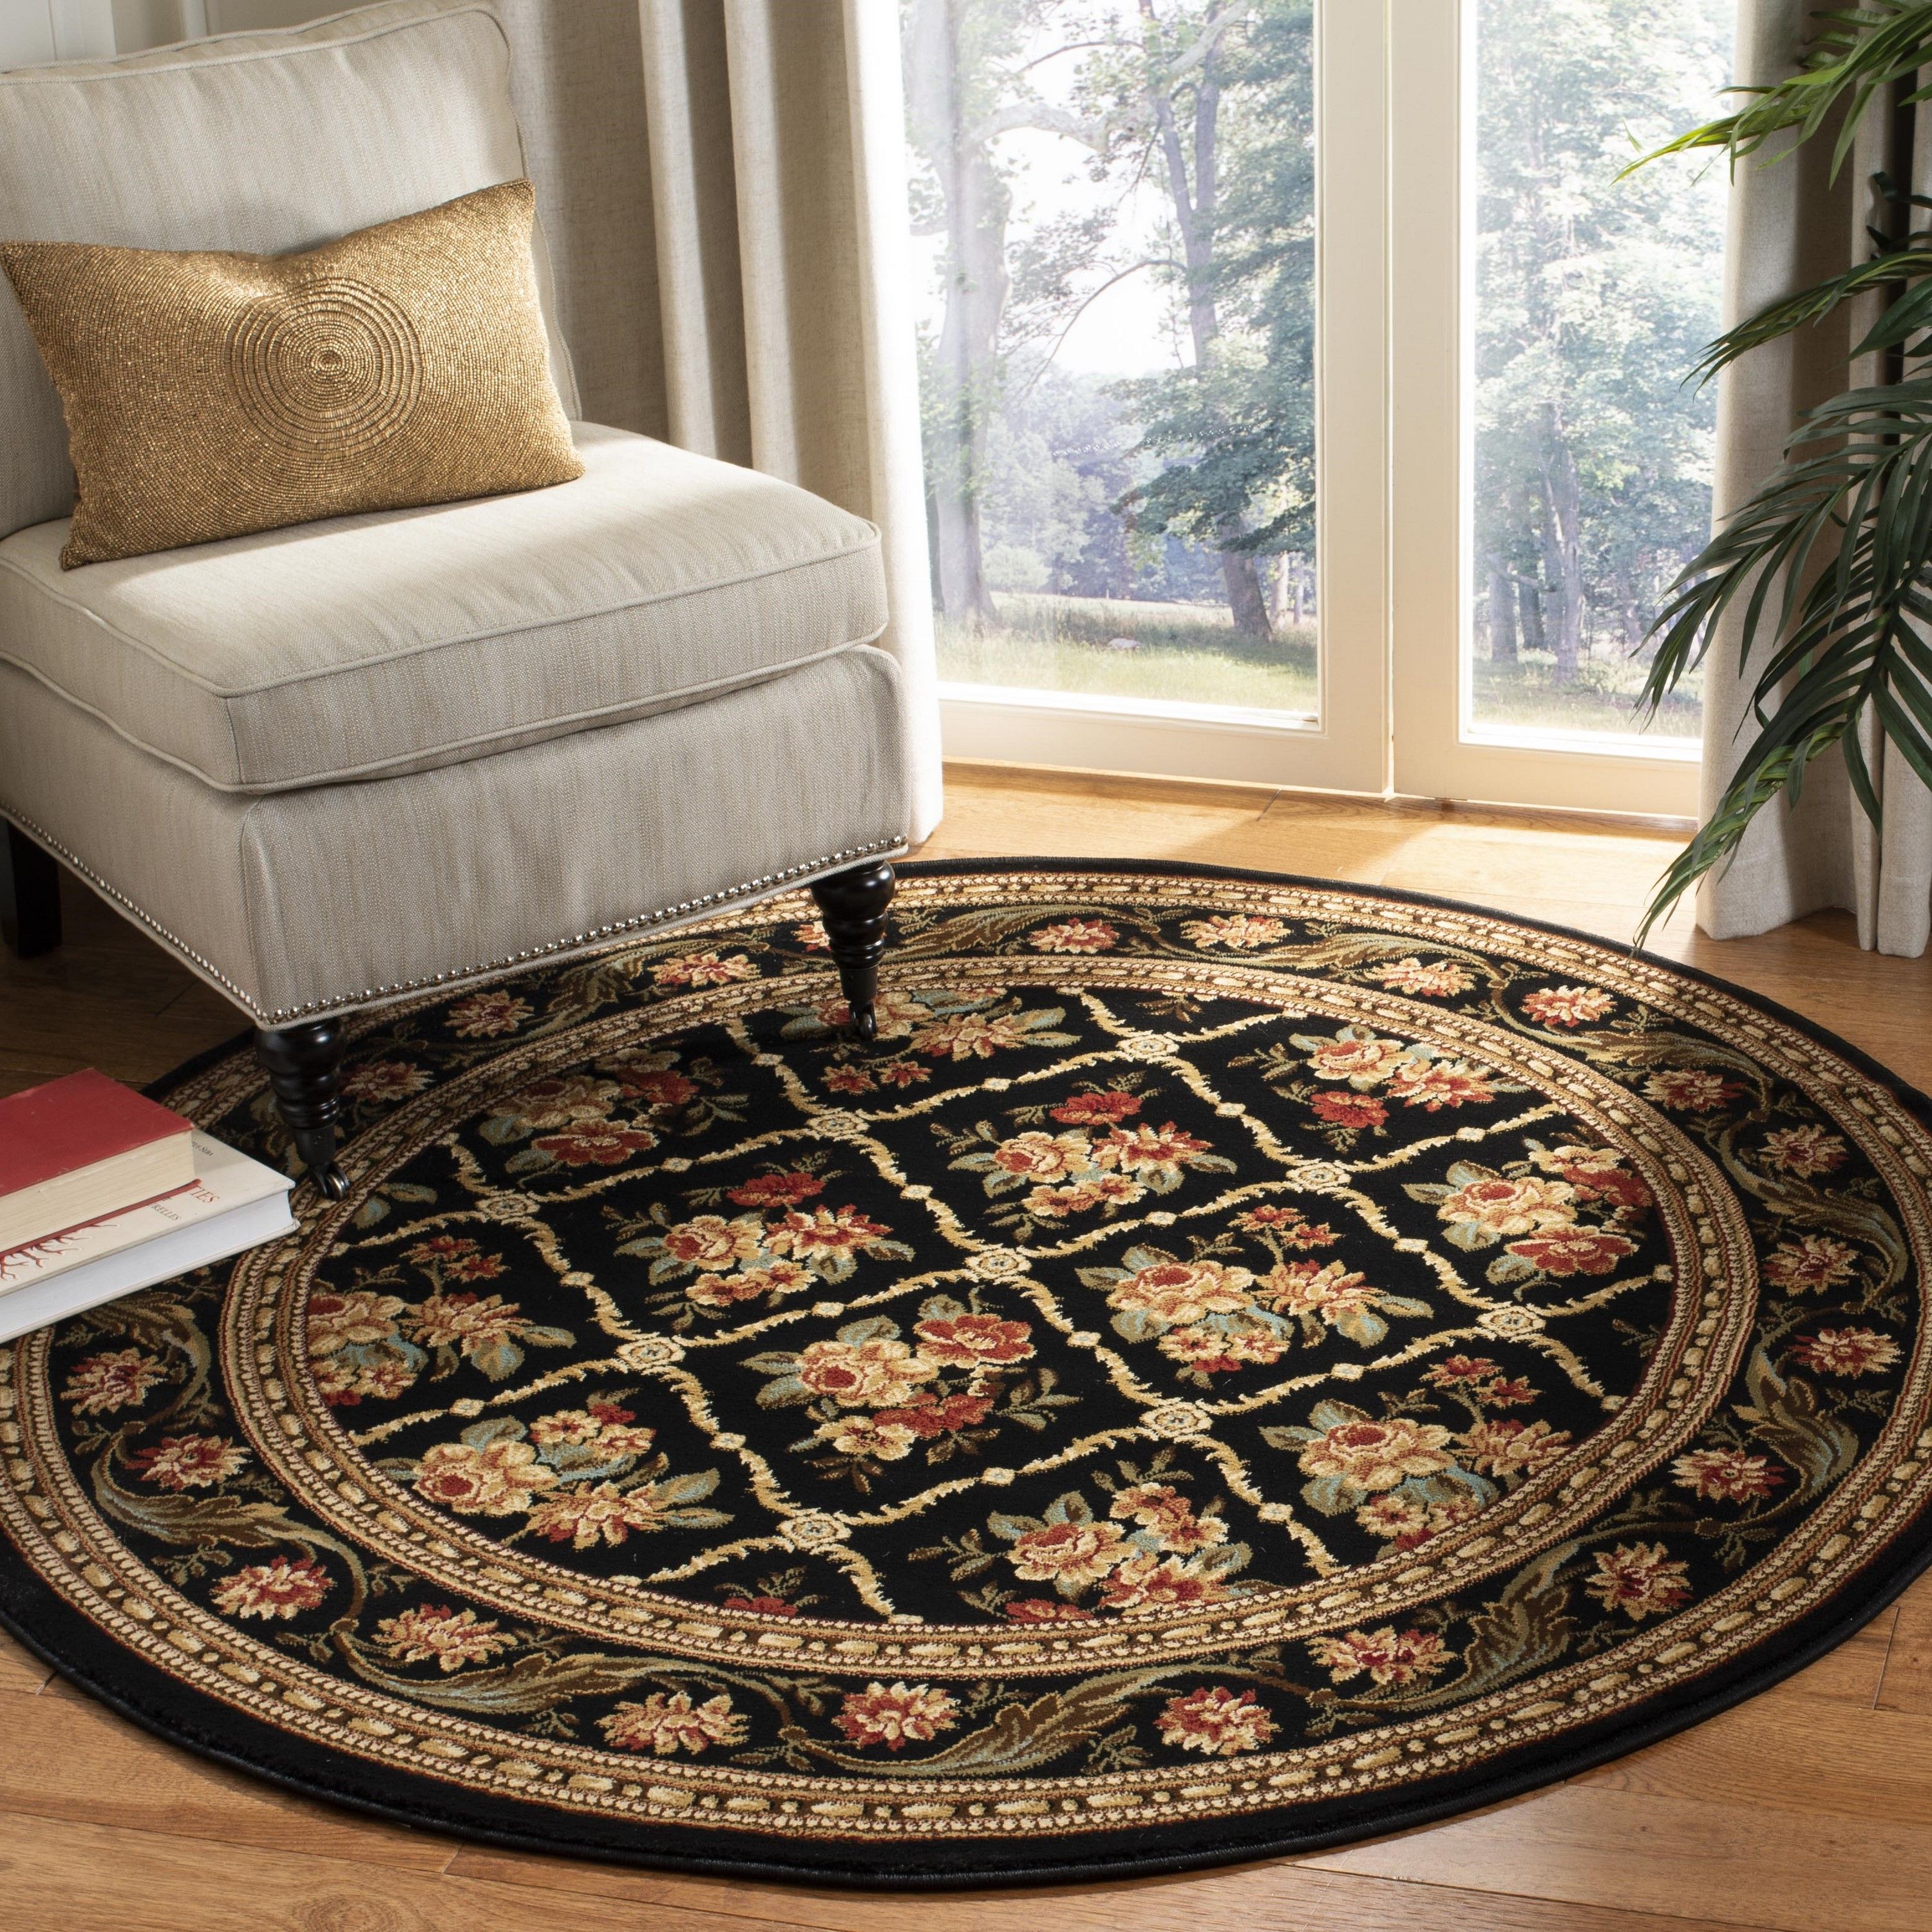 Safavieh Lyndhurst Floral Lattice 5 X 5 Black/Black Round Indoor  Floral/Botanical Farmhouse/Cottage Area Rug In The Rugs Department At  Lowes With Lattice Indoor Rugs (View 12 of 15)